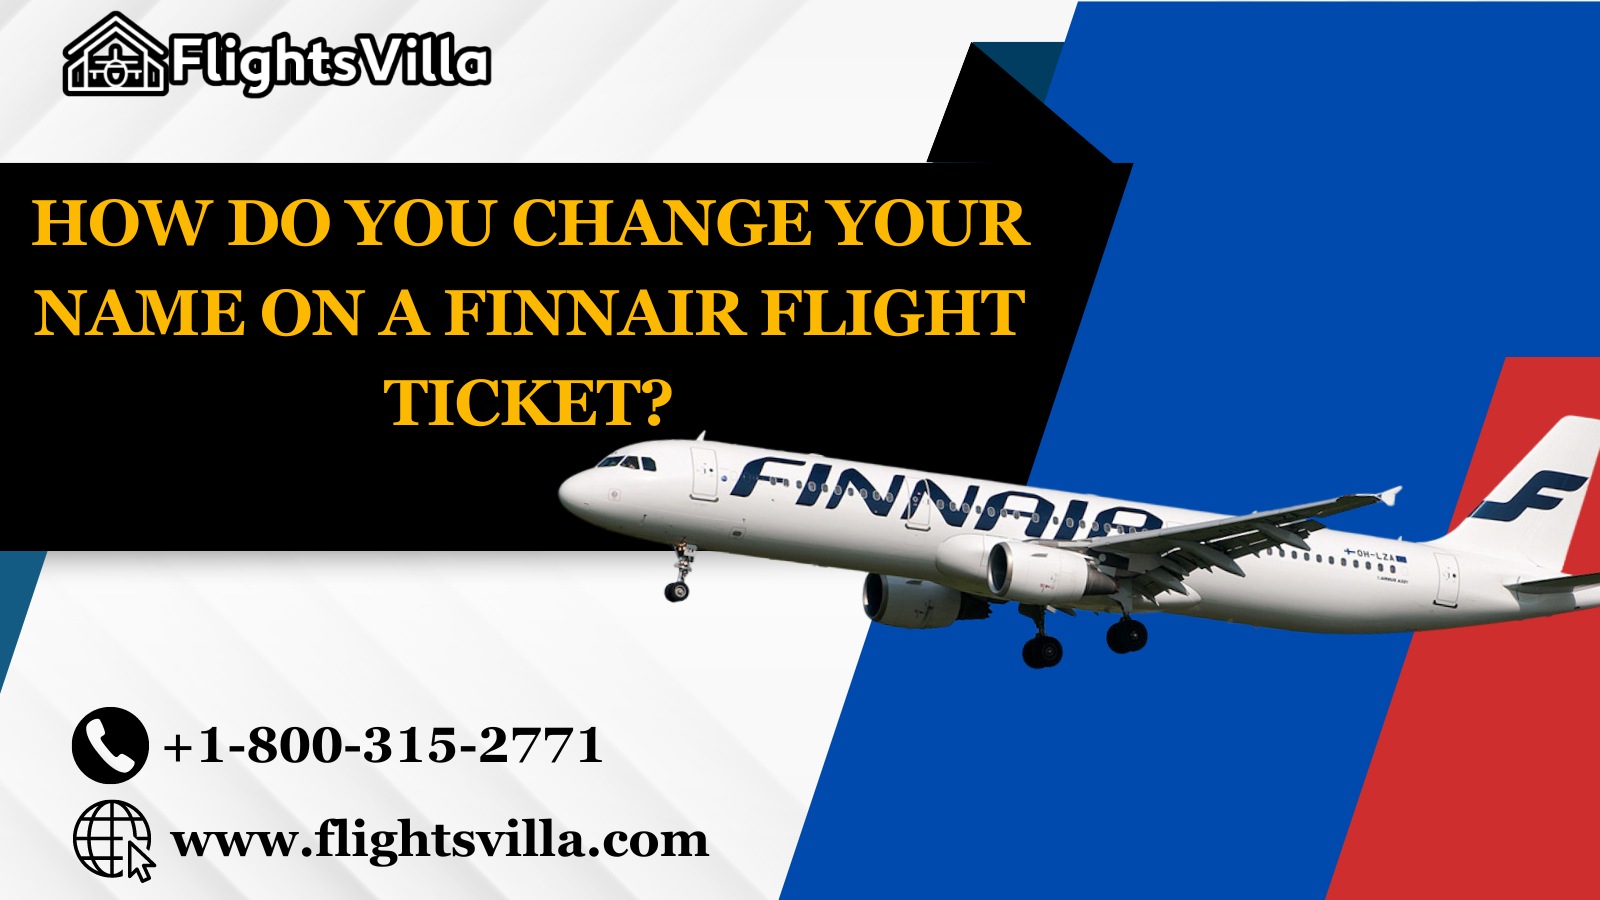 How Do You Change Your Name on a Finnair Flight Ticket